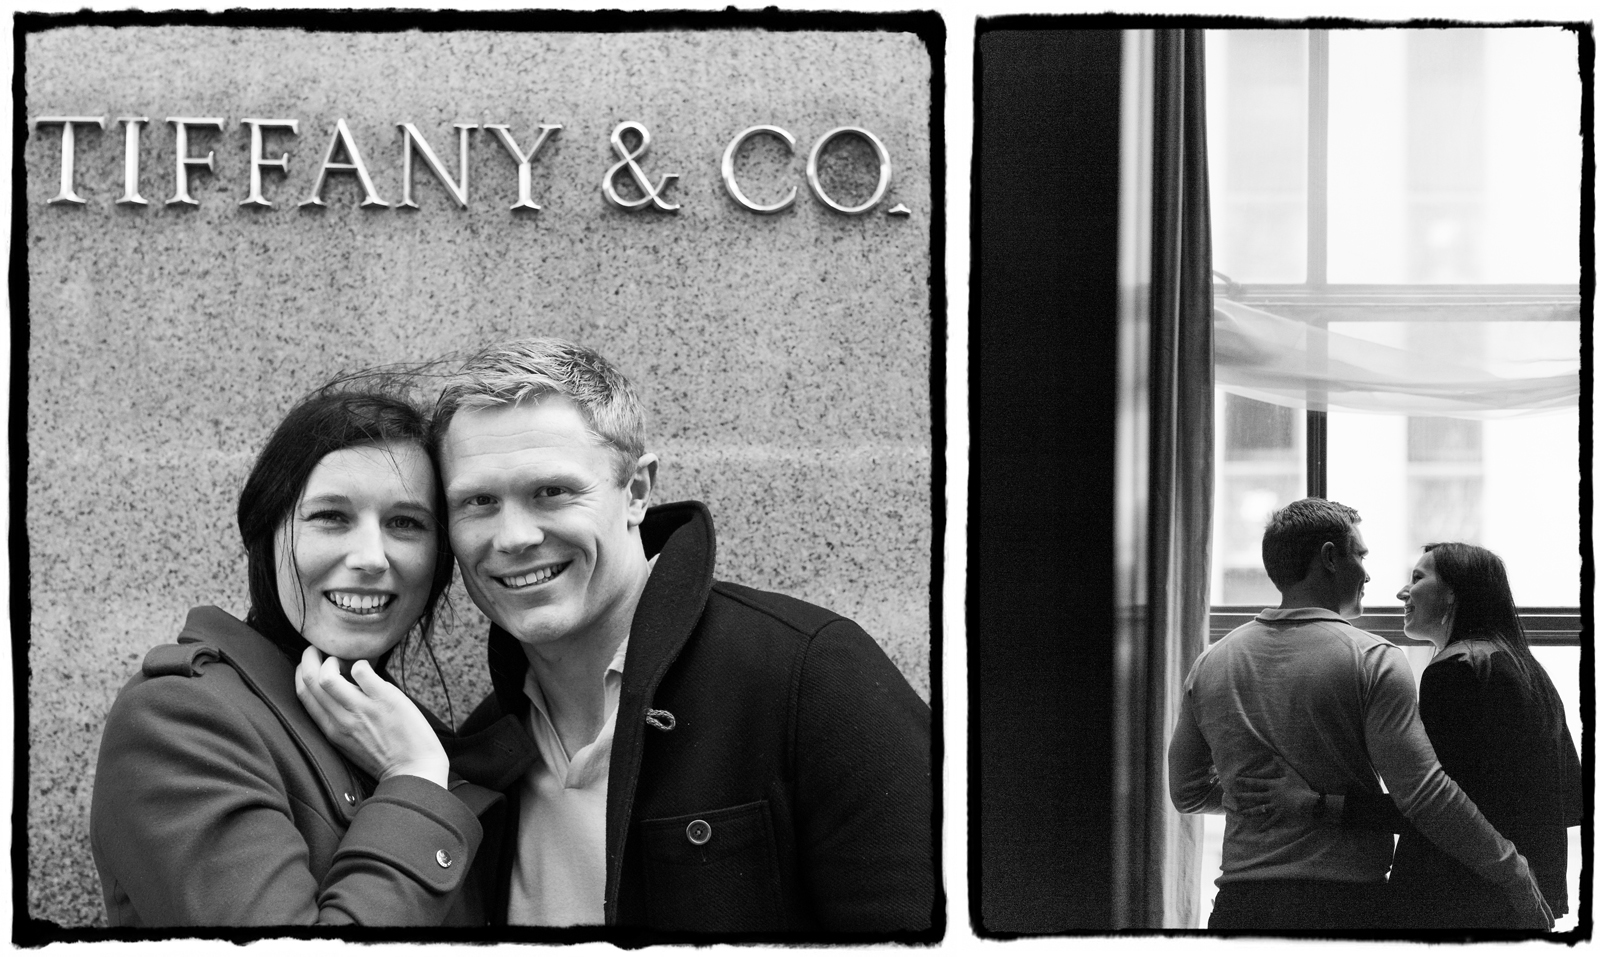 After she said yes, I documented their trip to TIffany's flagship store on Park Ave.